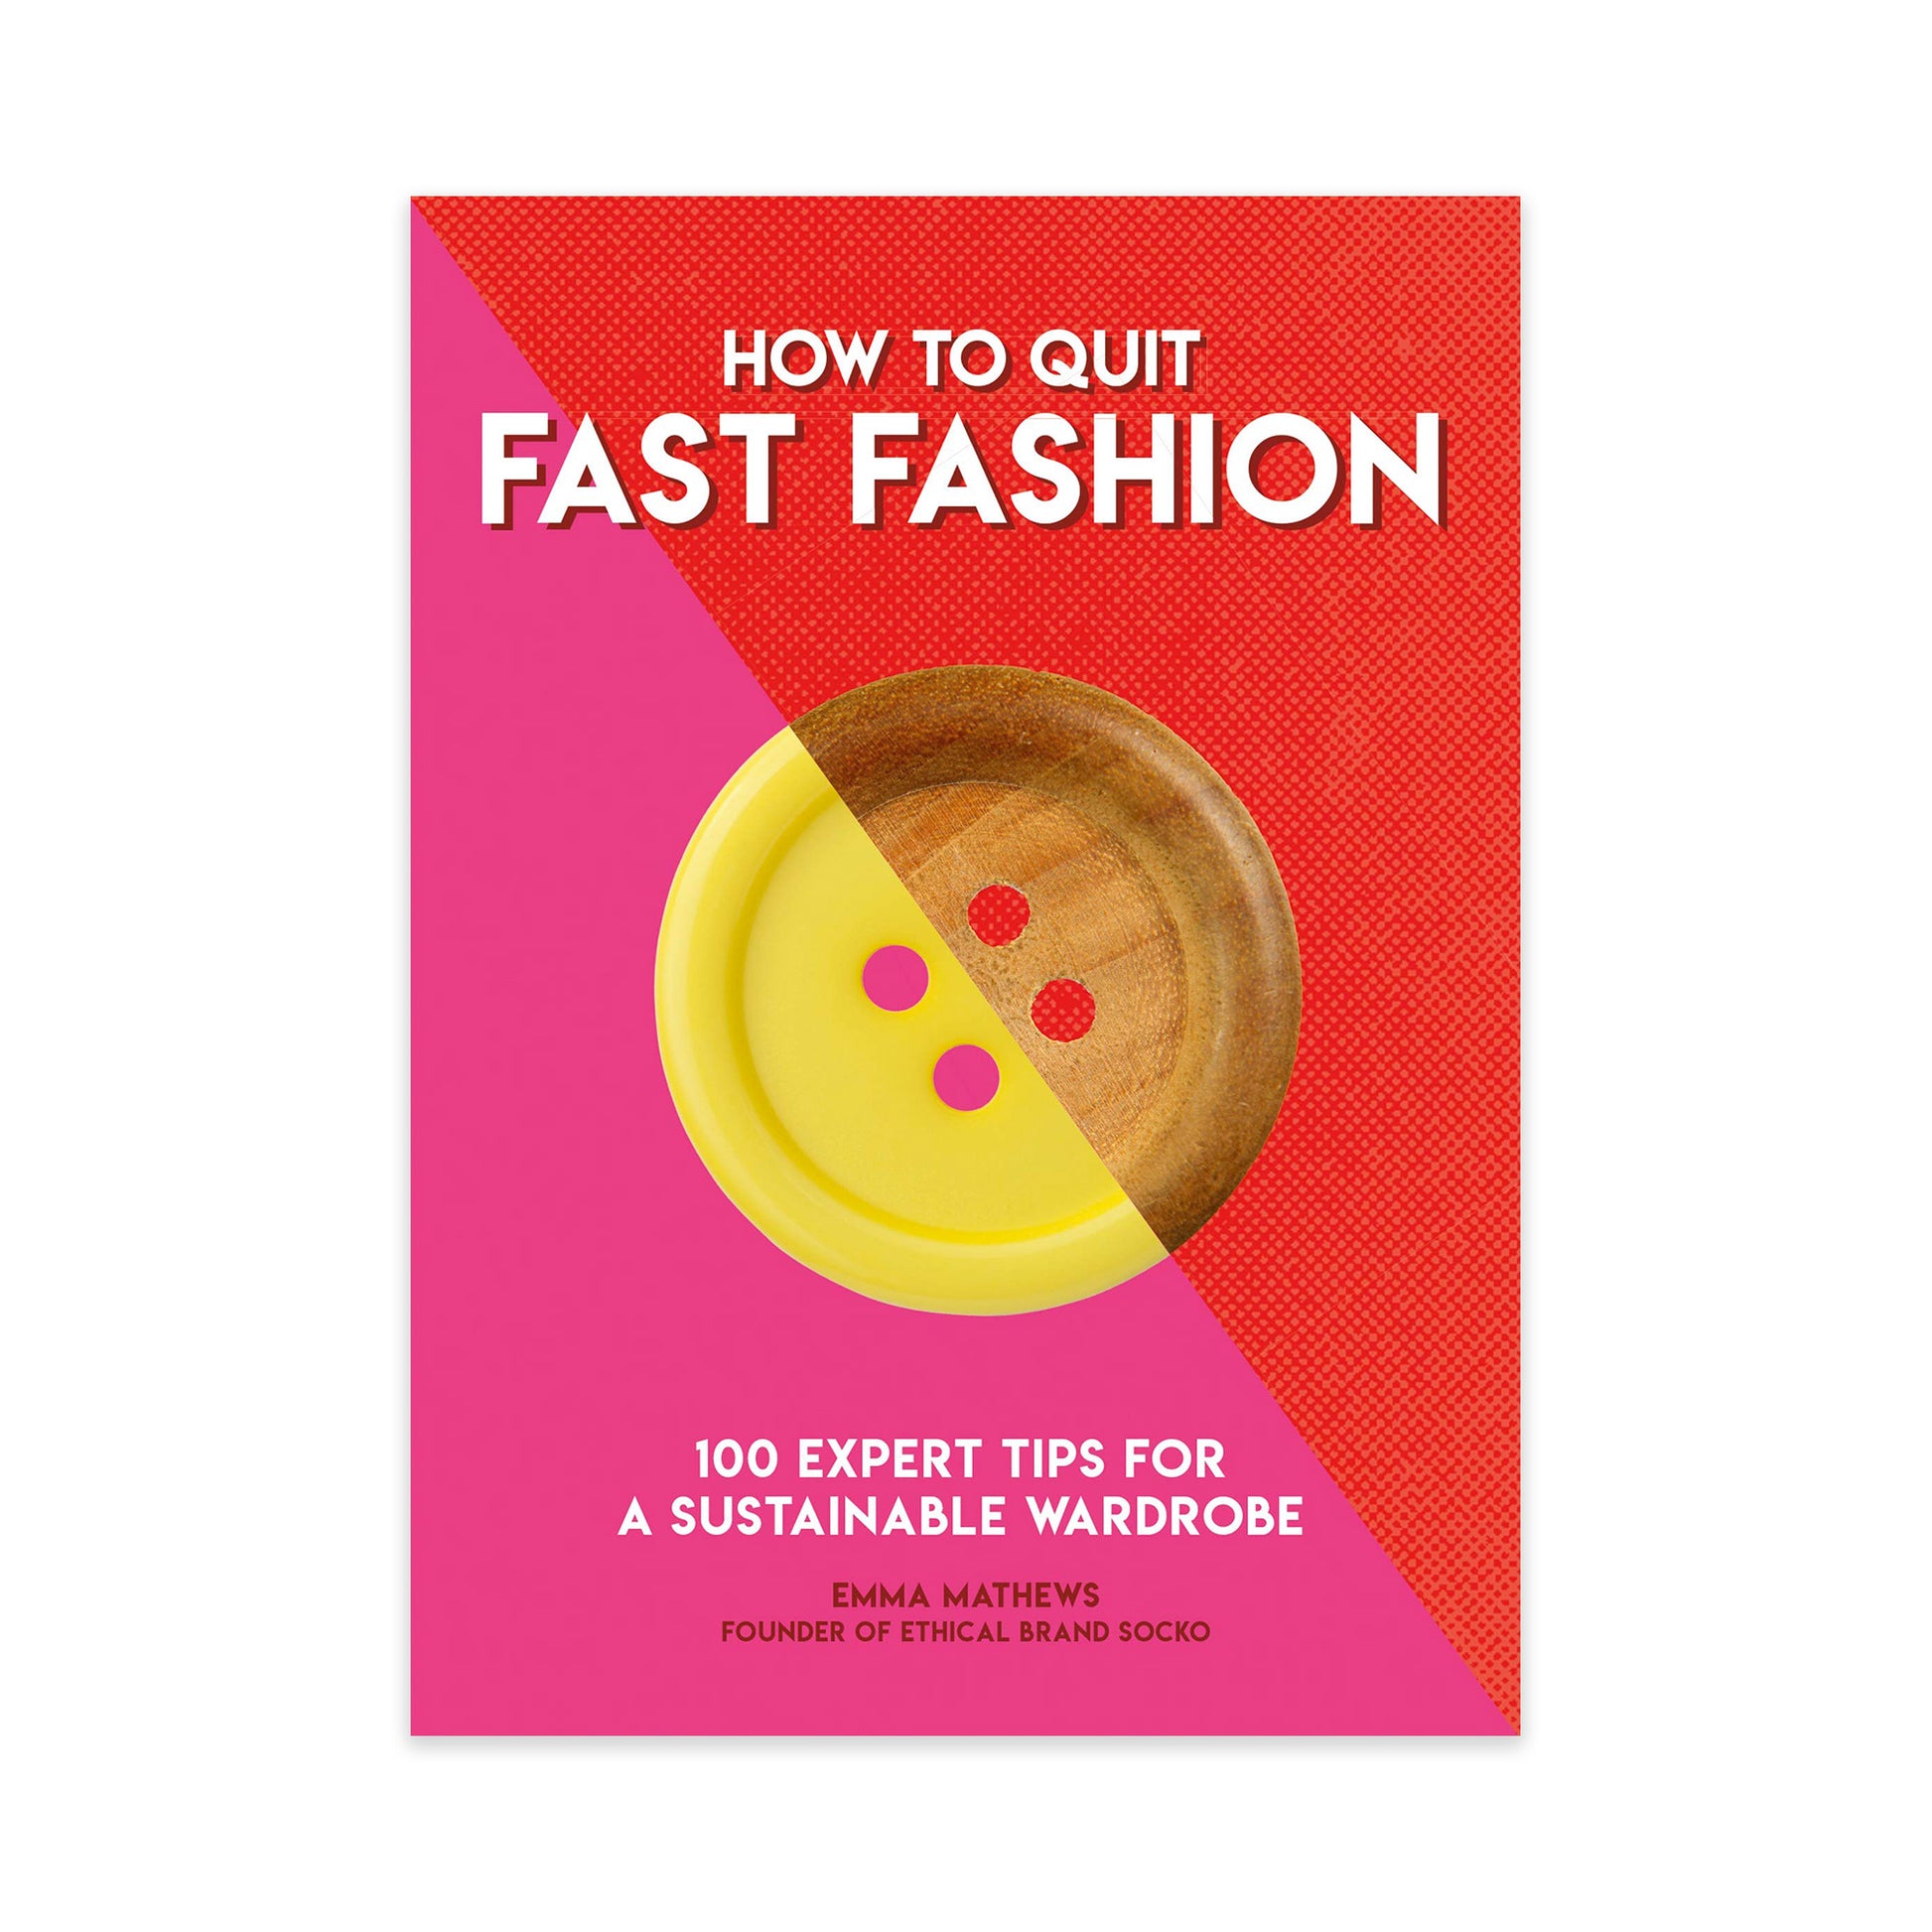 How to Quit Fast Fashion book 100 expert tips for a sustainable wardrobe